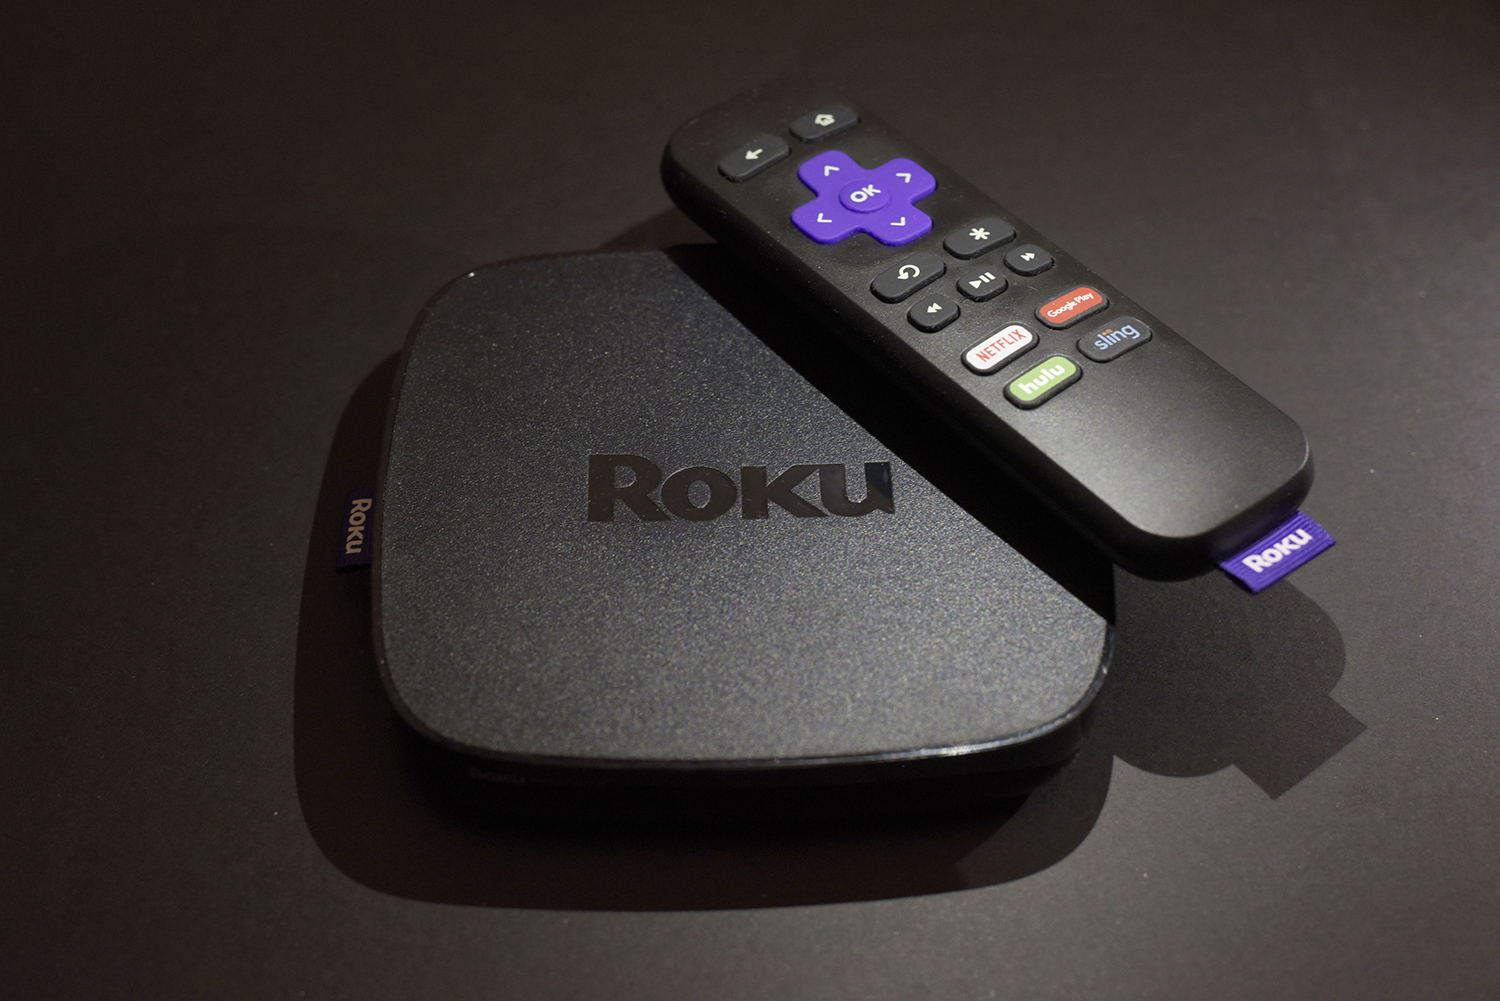 Netflix will stop working on December 1st if you use one of these Roku devices